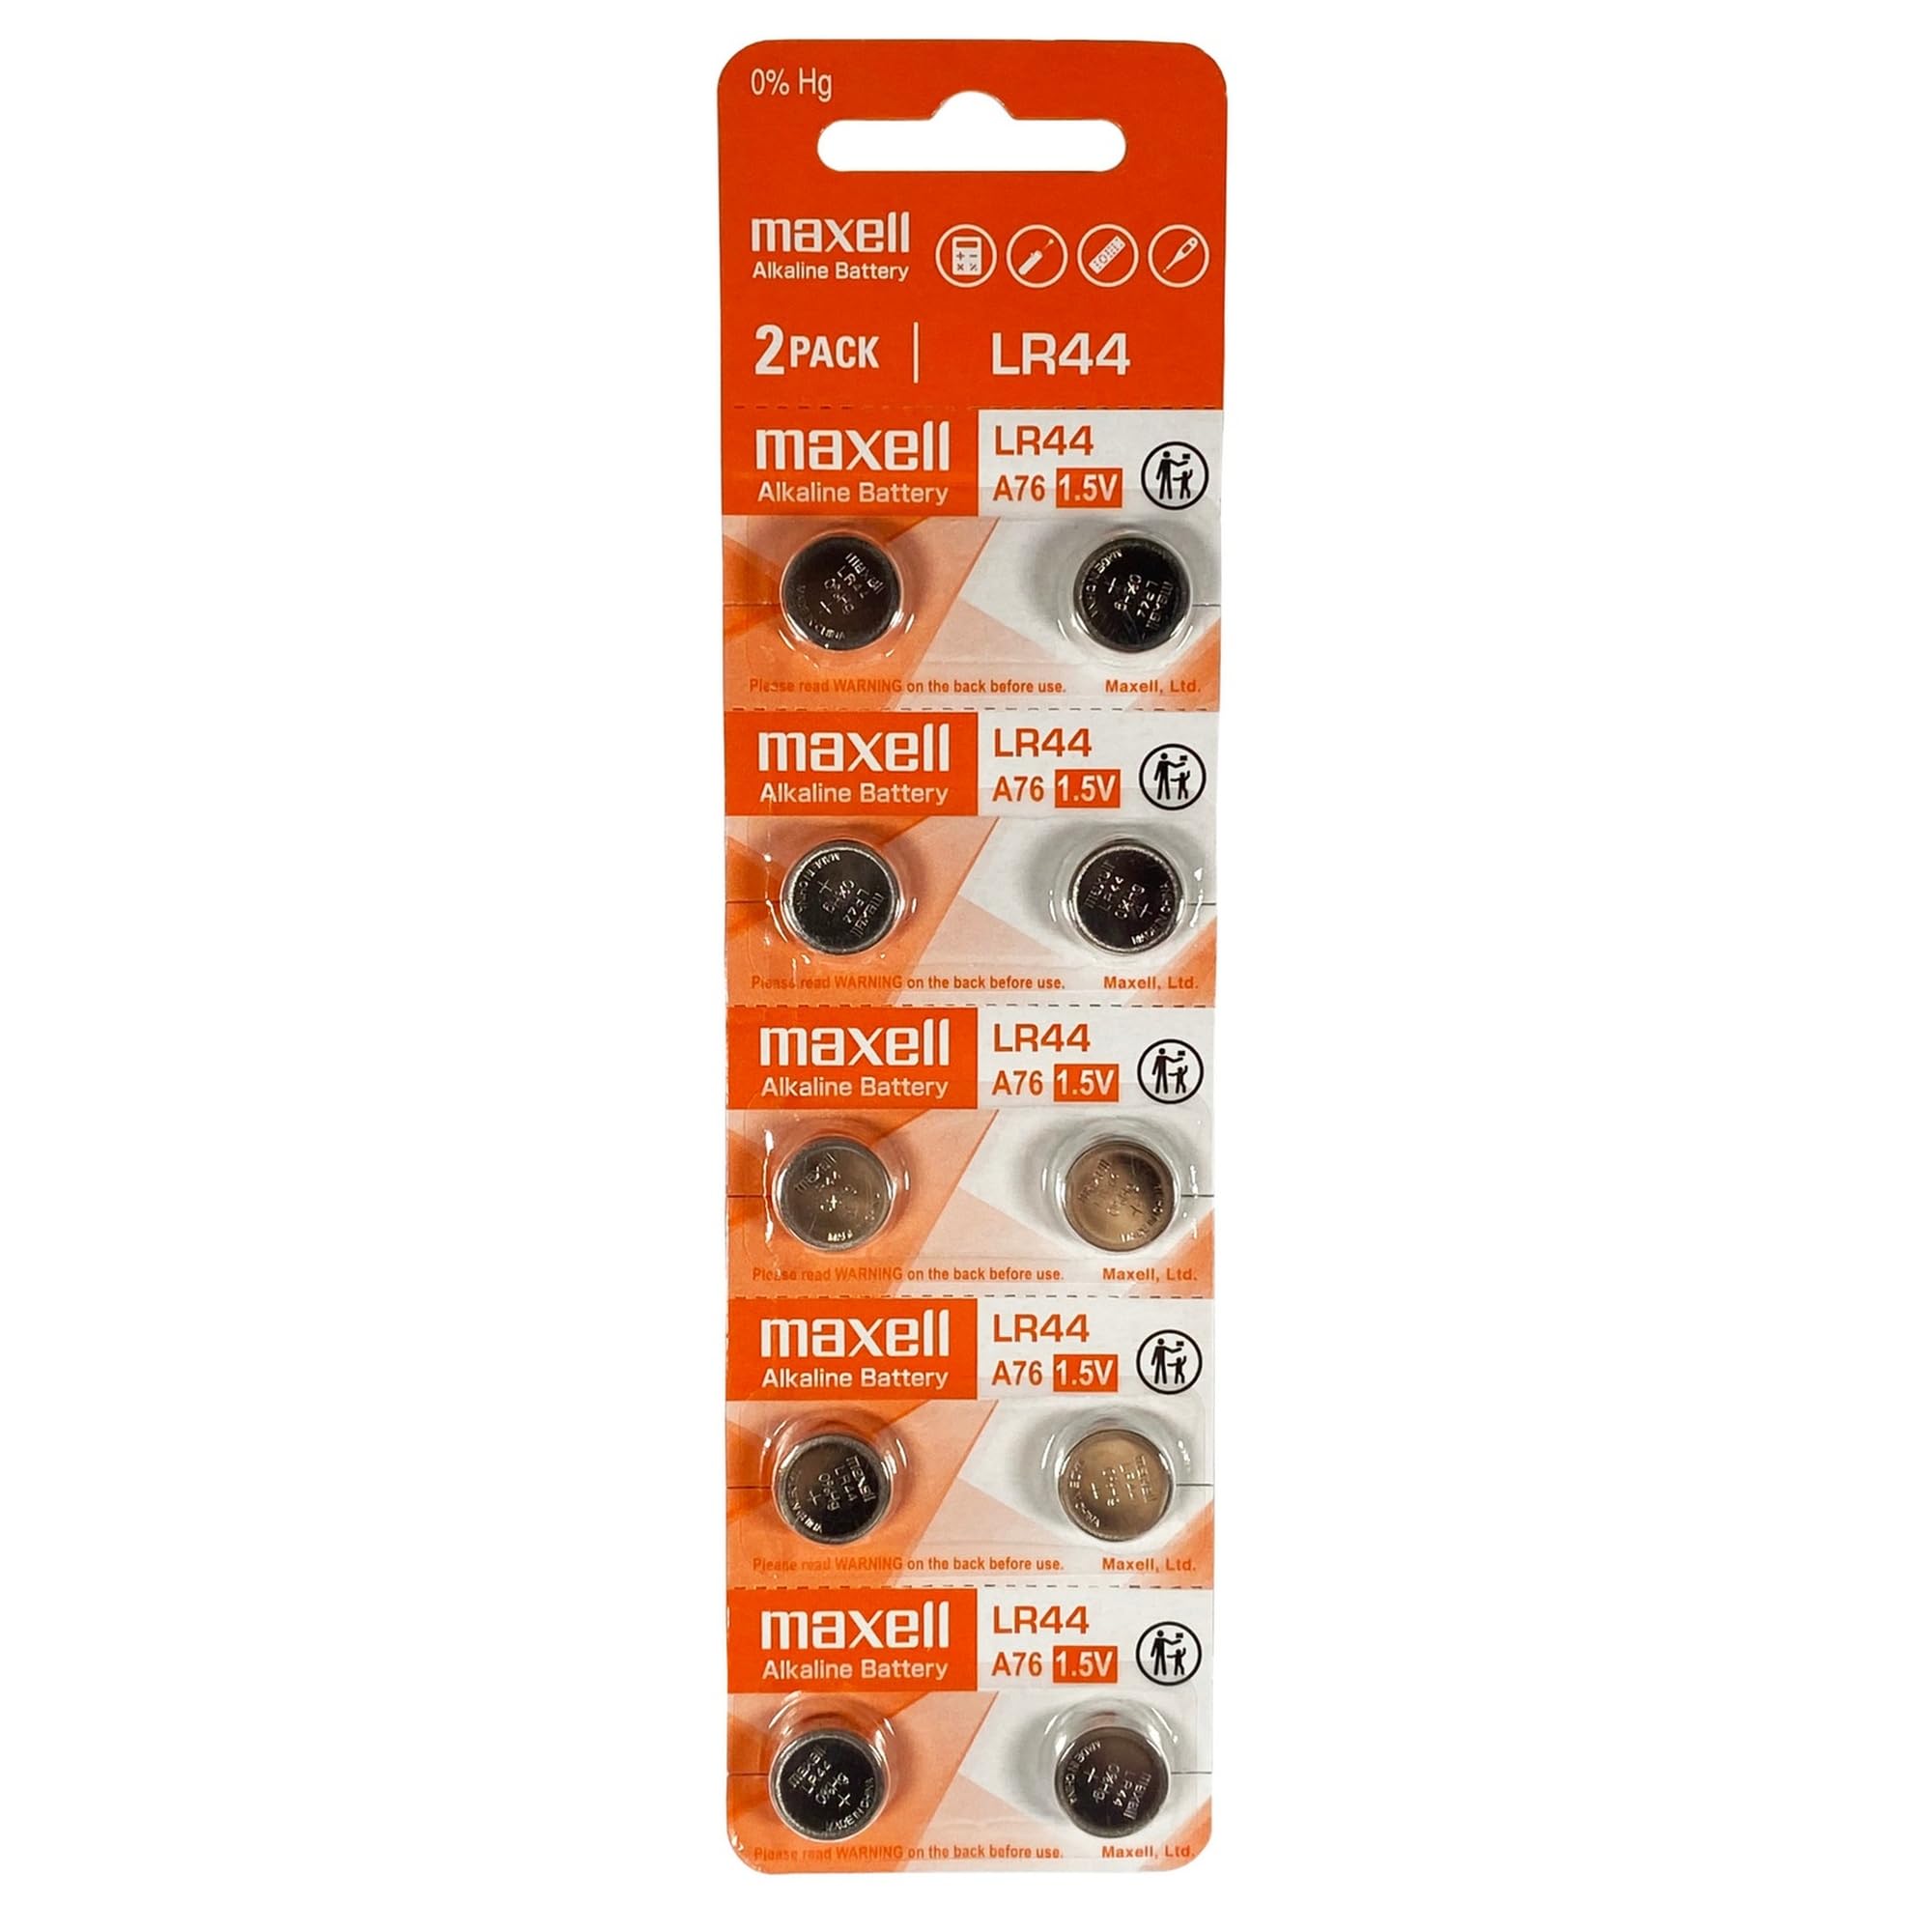 Maxell LR44 (A76) Batteries, 10 Count (775011)